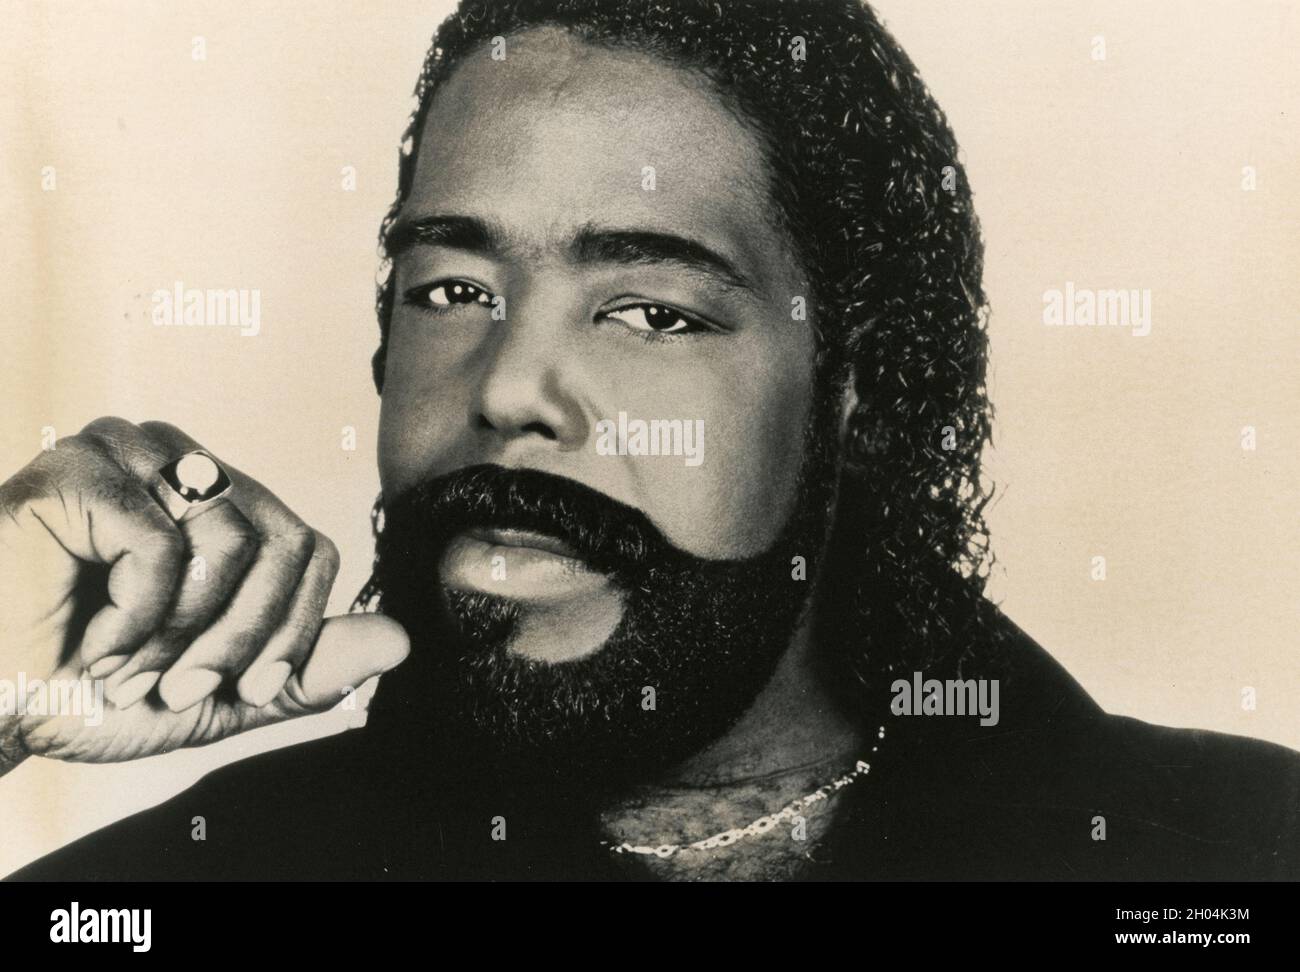 American singer and songwriter Barry White, 1980s Stock Photo